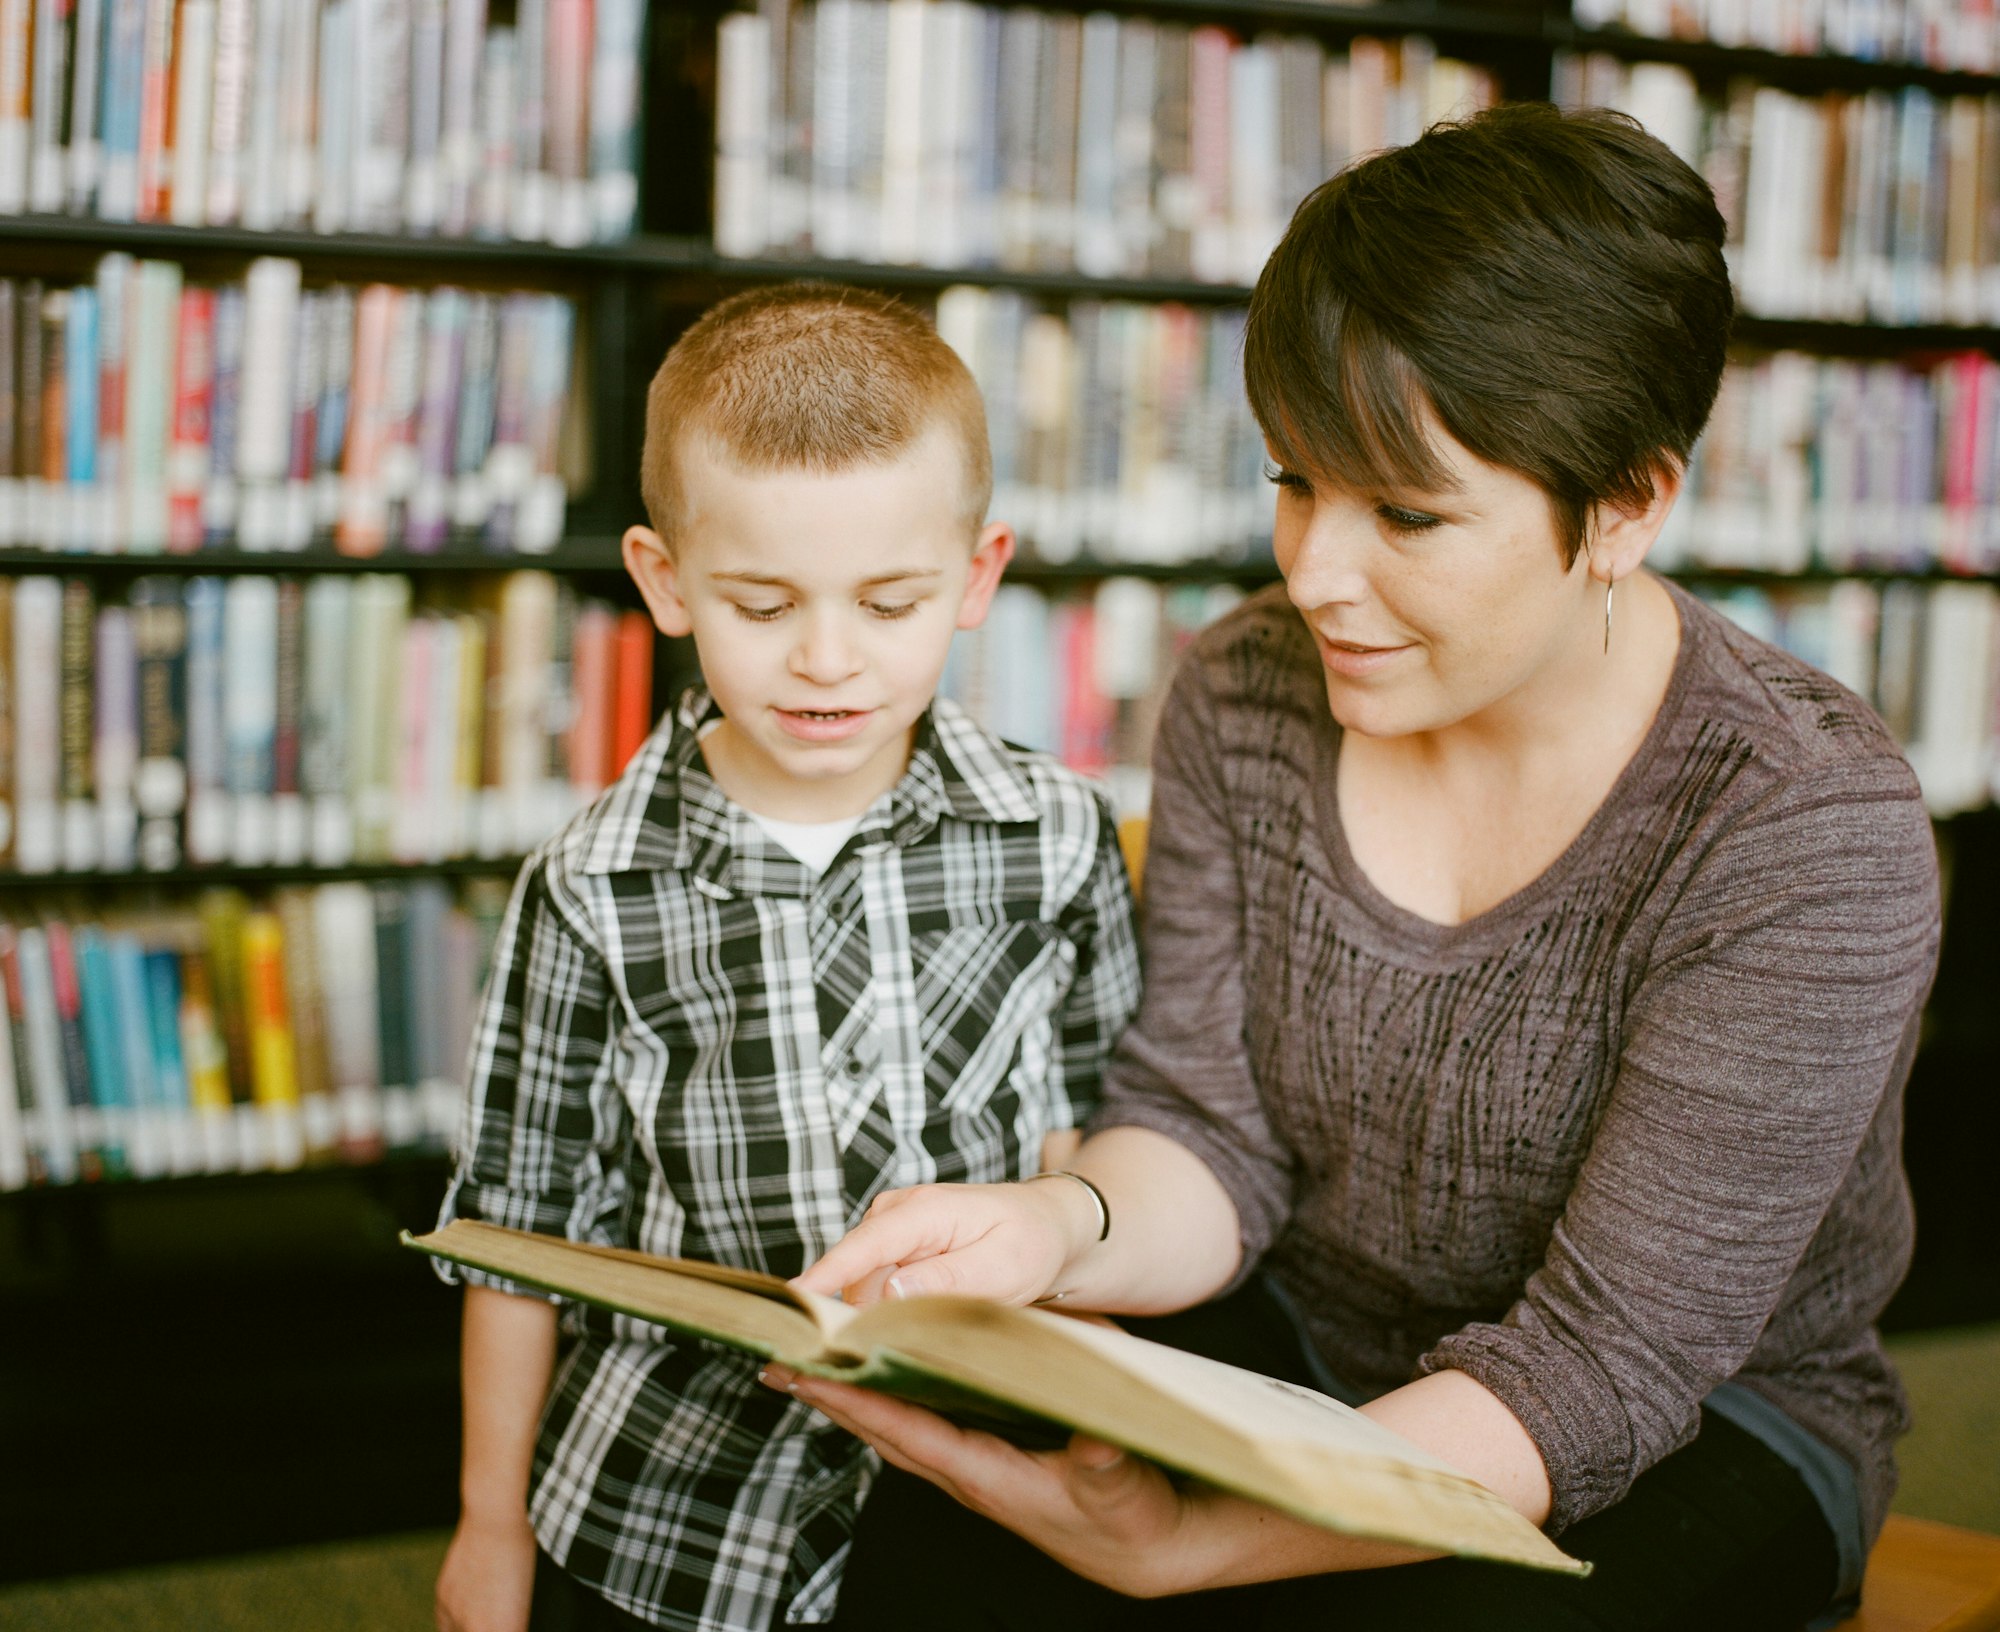 Mother reading to her son as he listens intently. Books in the background are slightly blurred creating the perfect atmosphere to instill a lifelong love of reading. The 3 - 6 year old boy is engaged, happy, the moment is captured in this photo creating a lifelong memory. 

https://www.awcreativeut.com
https://www.instagram.com/AwCreativeUT/
https://www.citystorageif.com/
https://www.etsy.com/shop/AwCreativeUT

#AwCreativeUT #awcreative #AdamWinger 